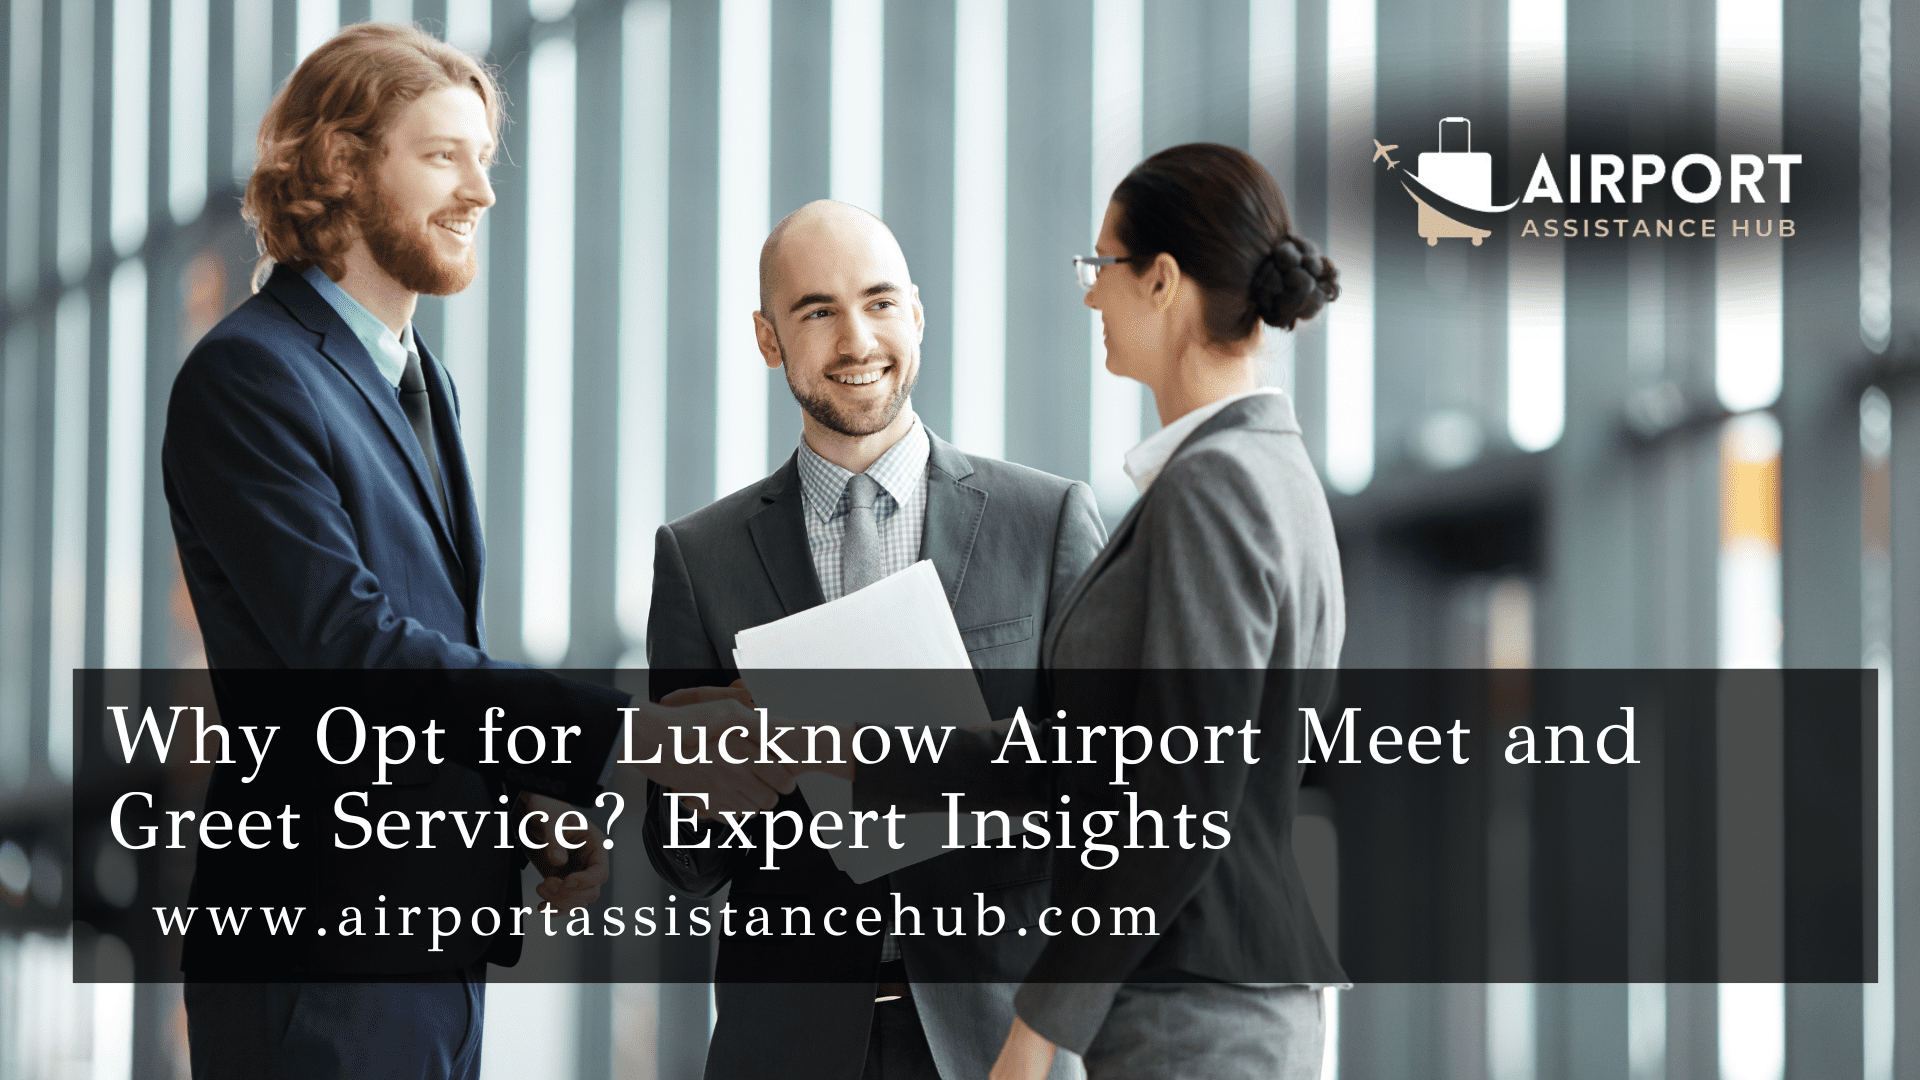 Why Opt for Lucknow Airport Meet and Greet Service? Expert Insights